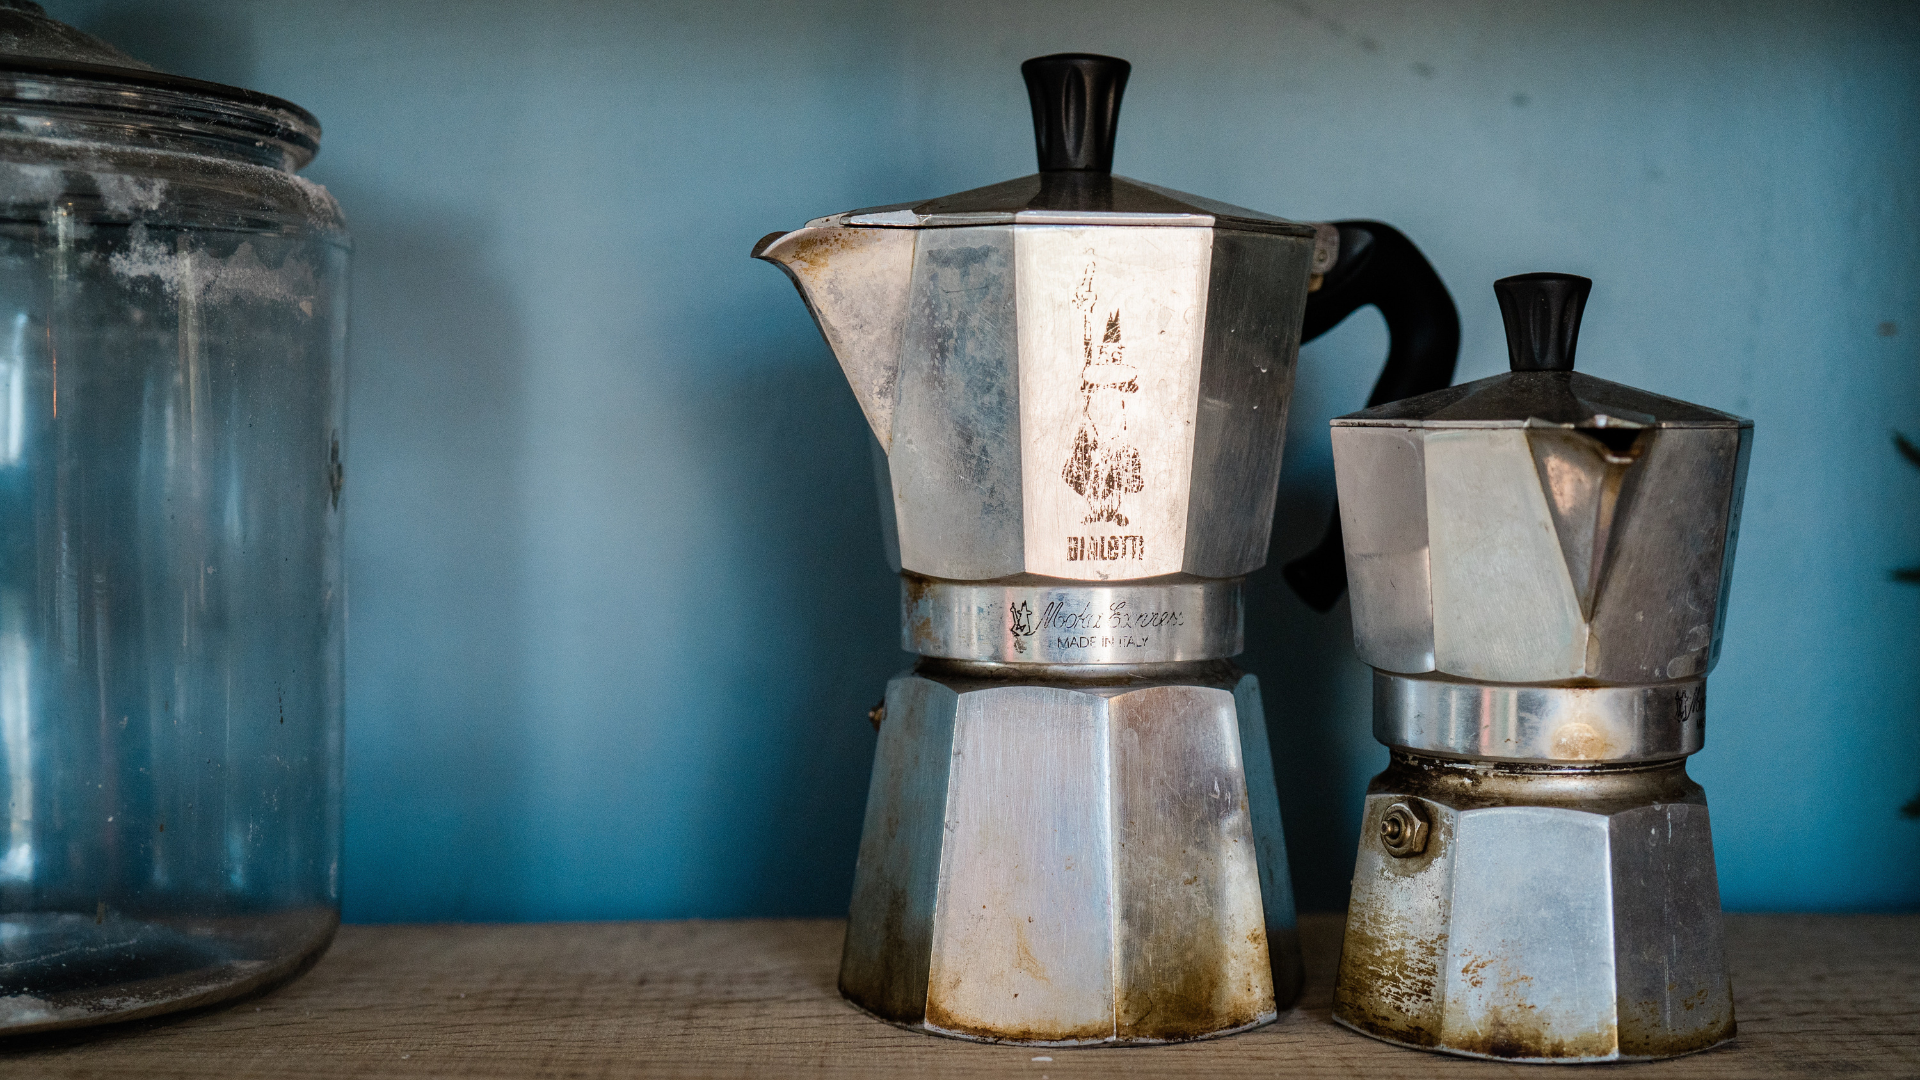 A Short History of the Bialetti Moka Stovetop Coffee Maker - Owlcation